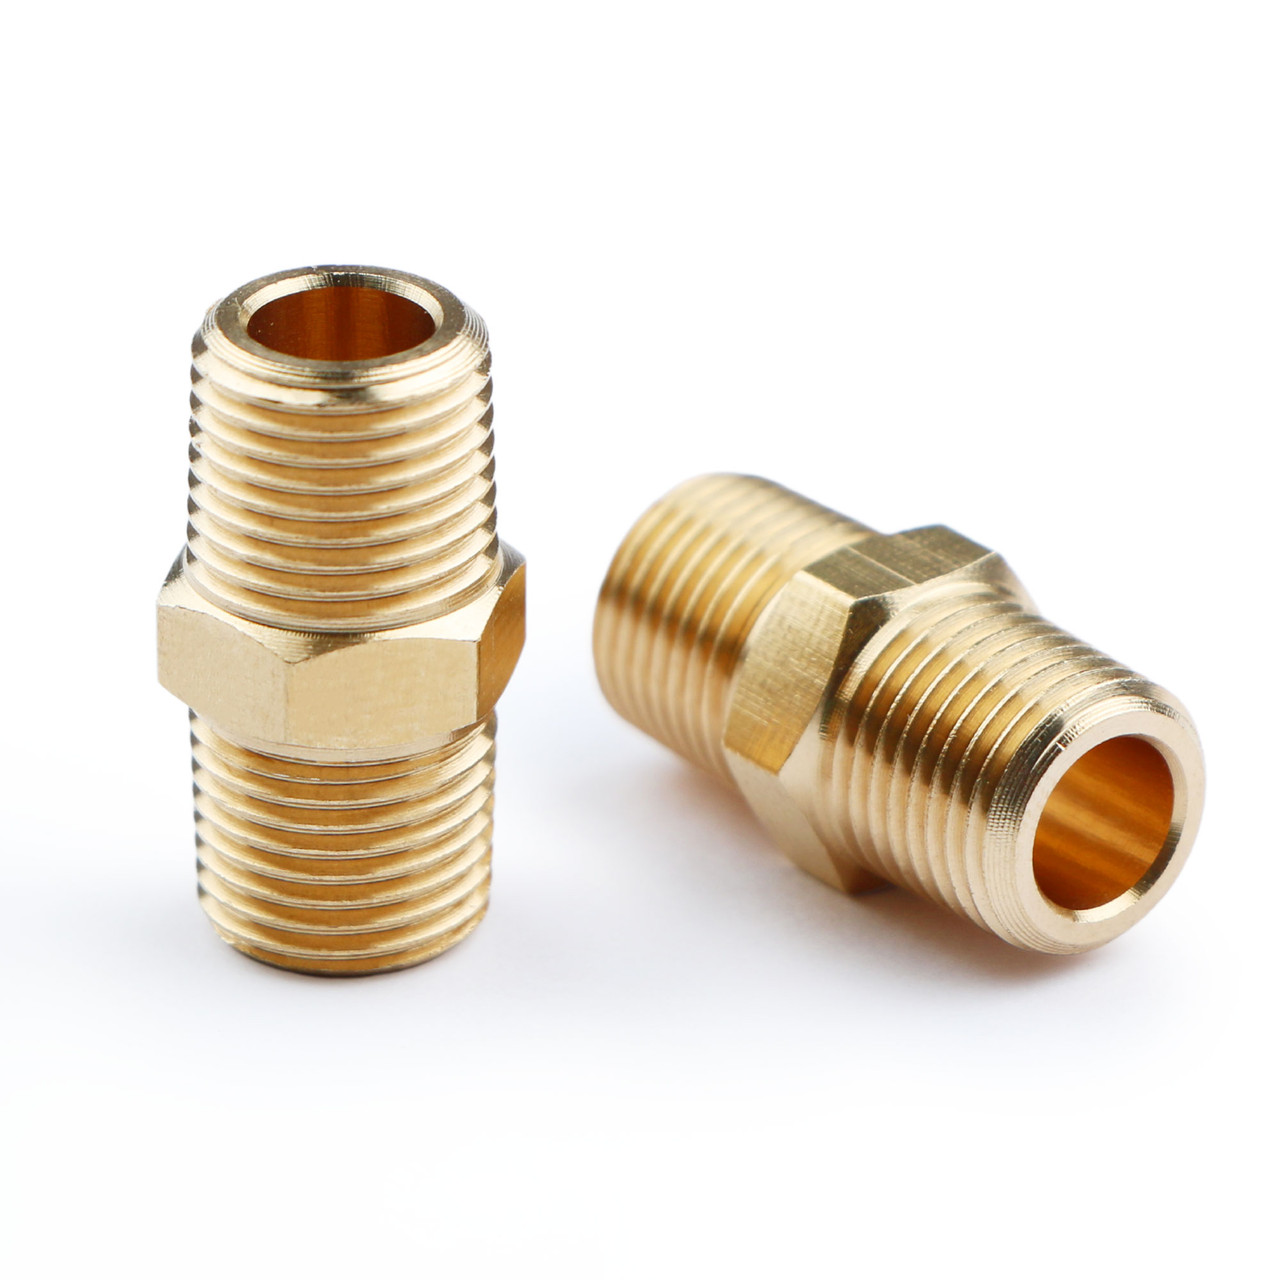 2PCS Brass Pipe Fitting, Adapter 3/8 Male Pipe x 1/2 Female Pipe